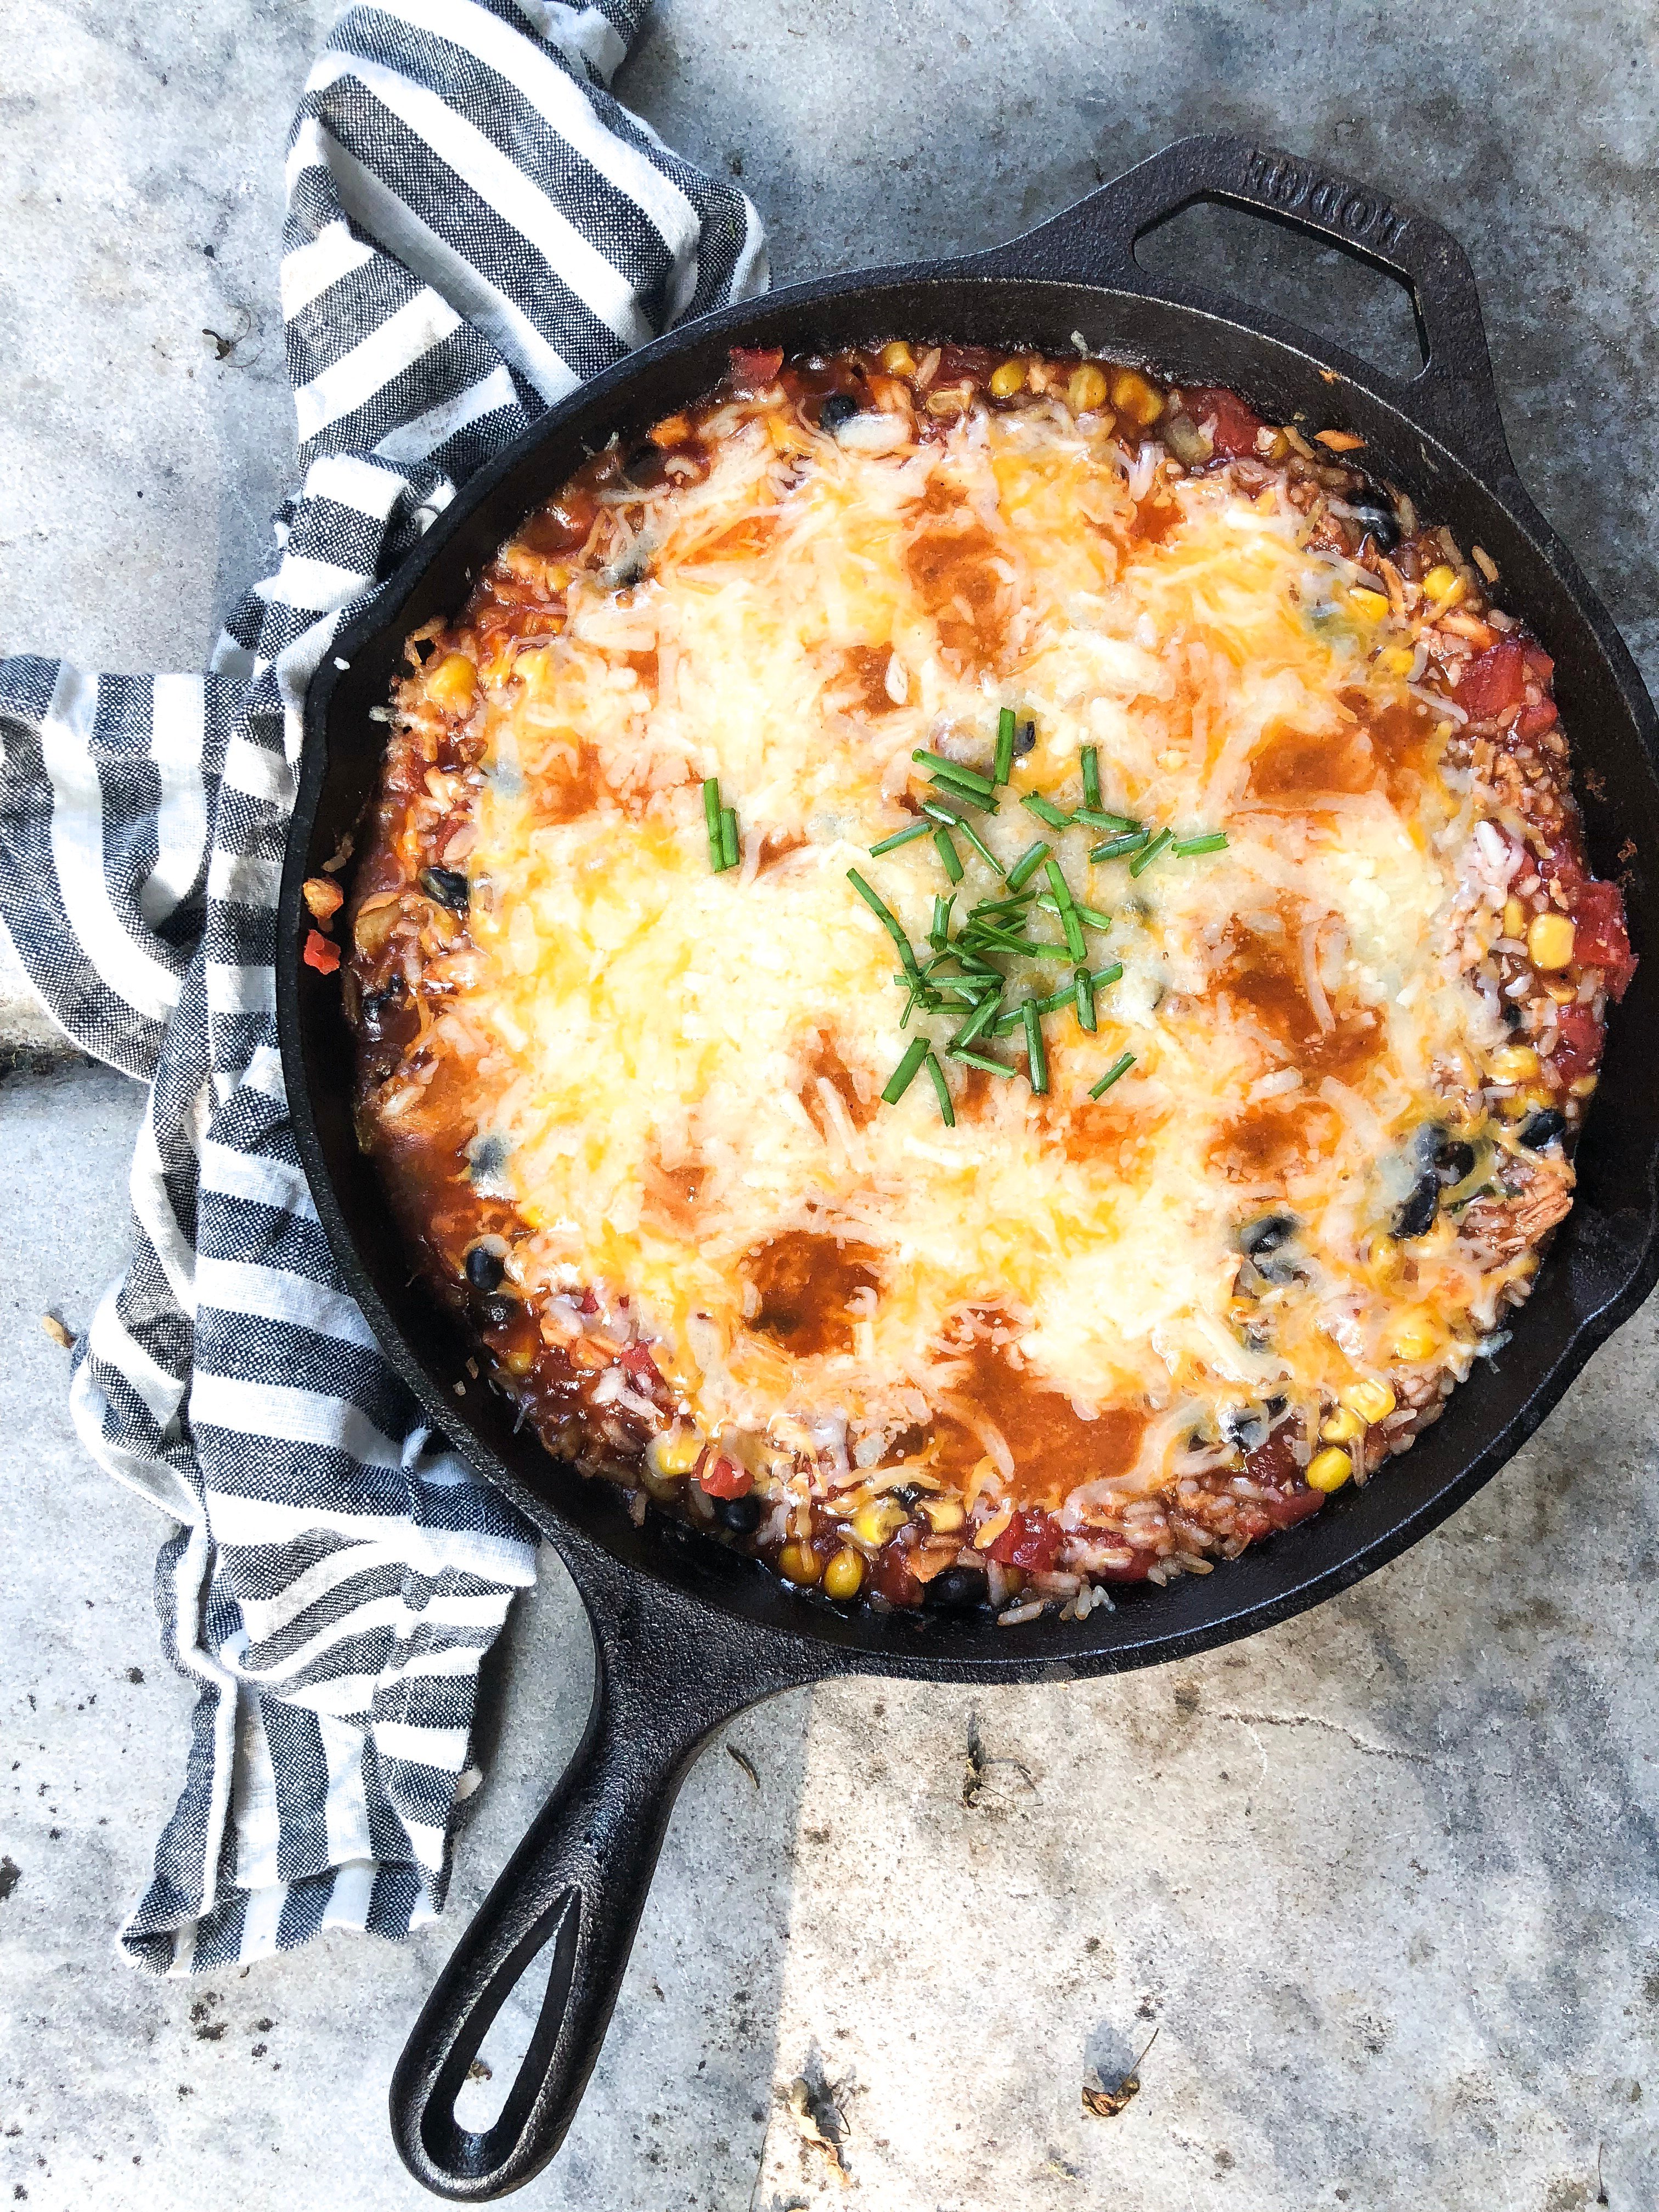 Lifestyle Blog Chocolate & Lace shares her top rated recipe for easy Pulled Chicken BBQ Skillet